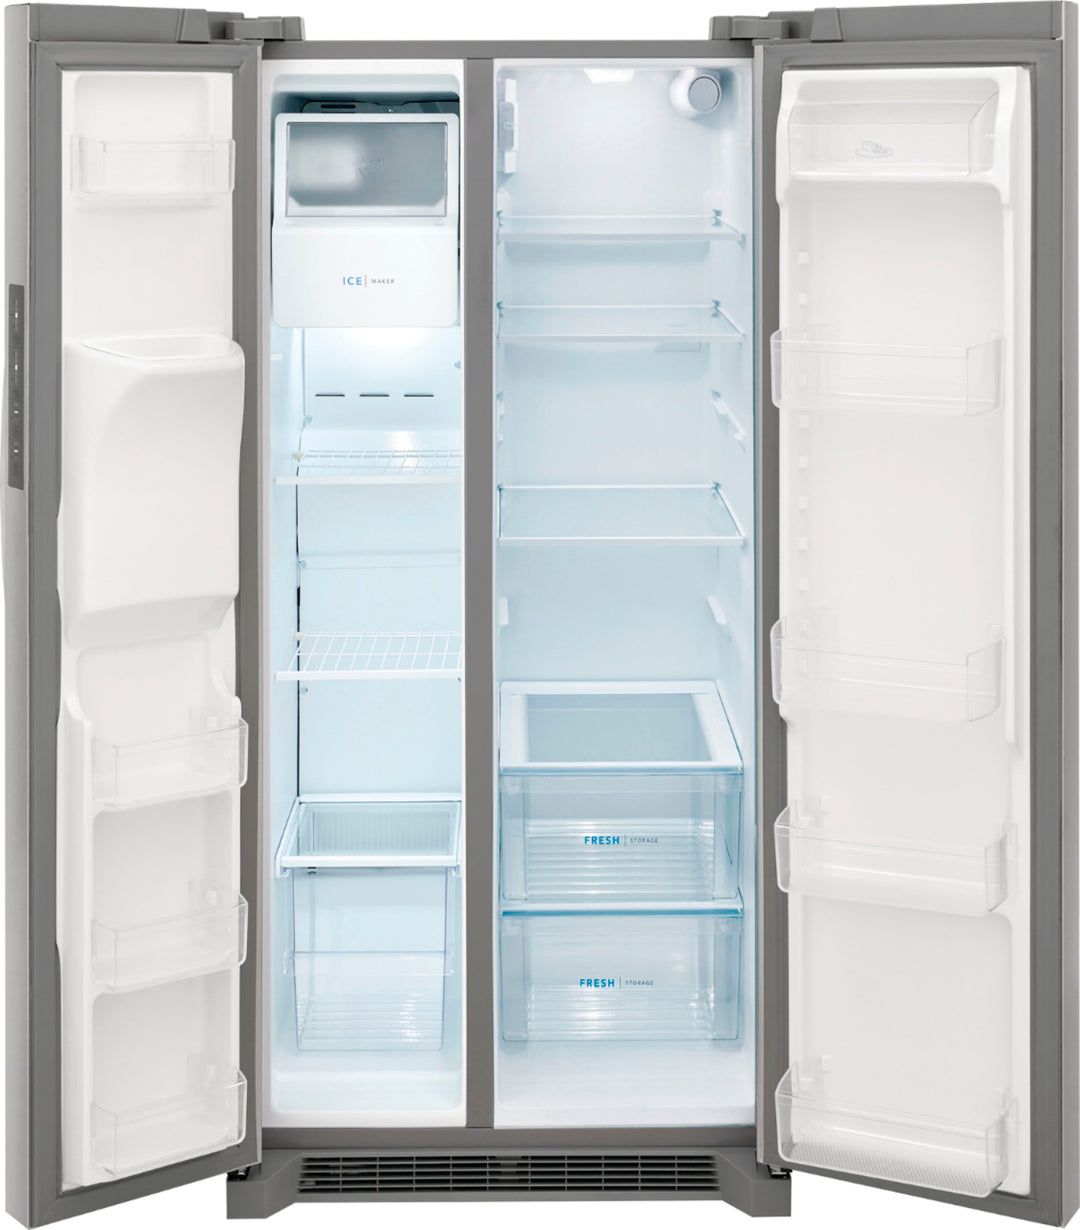 Frigidaire - 22.3 Cu. Ft. Side-by-Side Refrigerator - Stainless steel_10